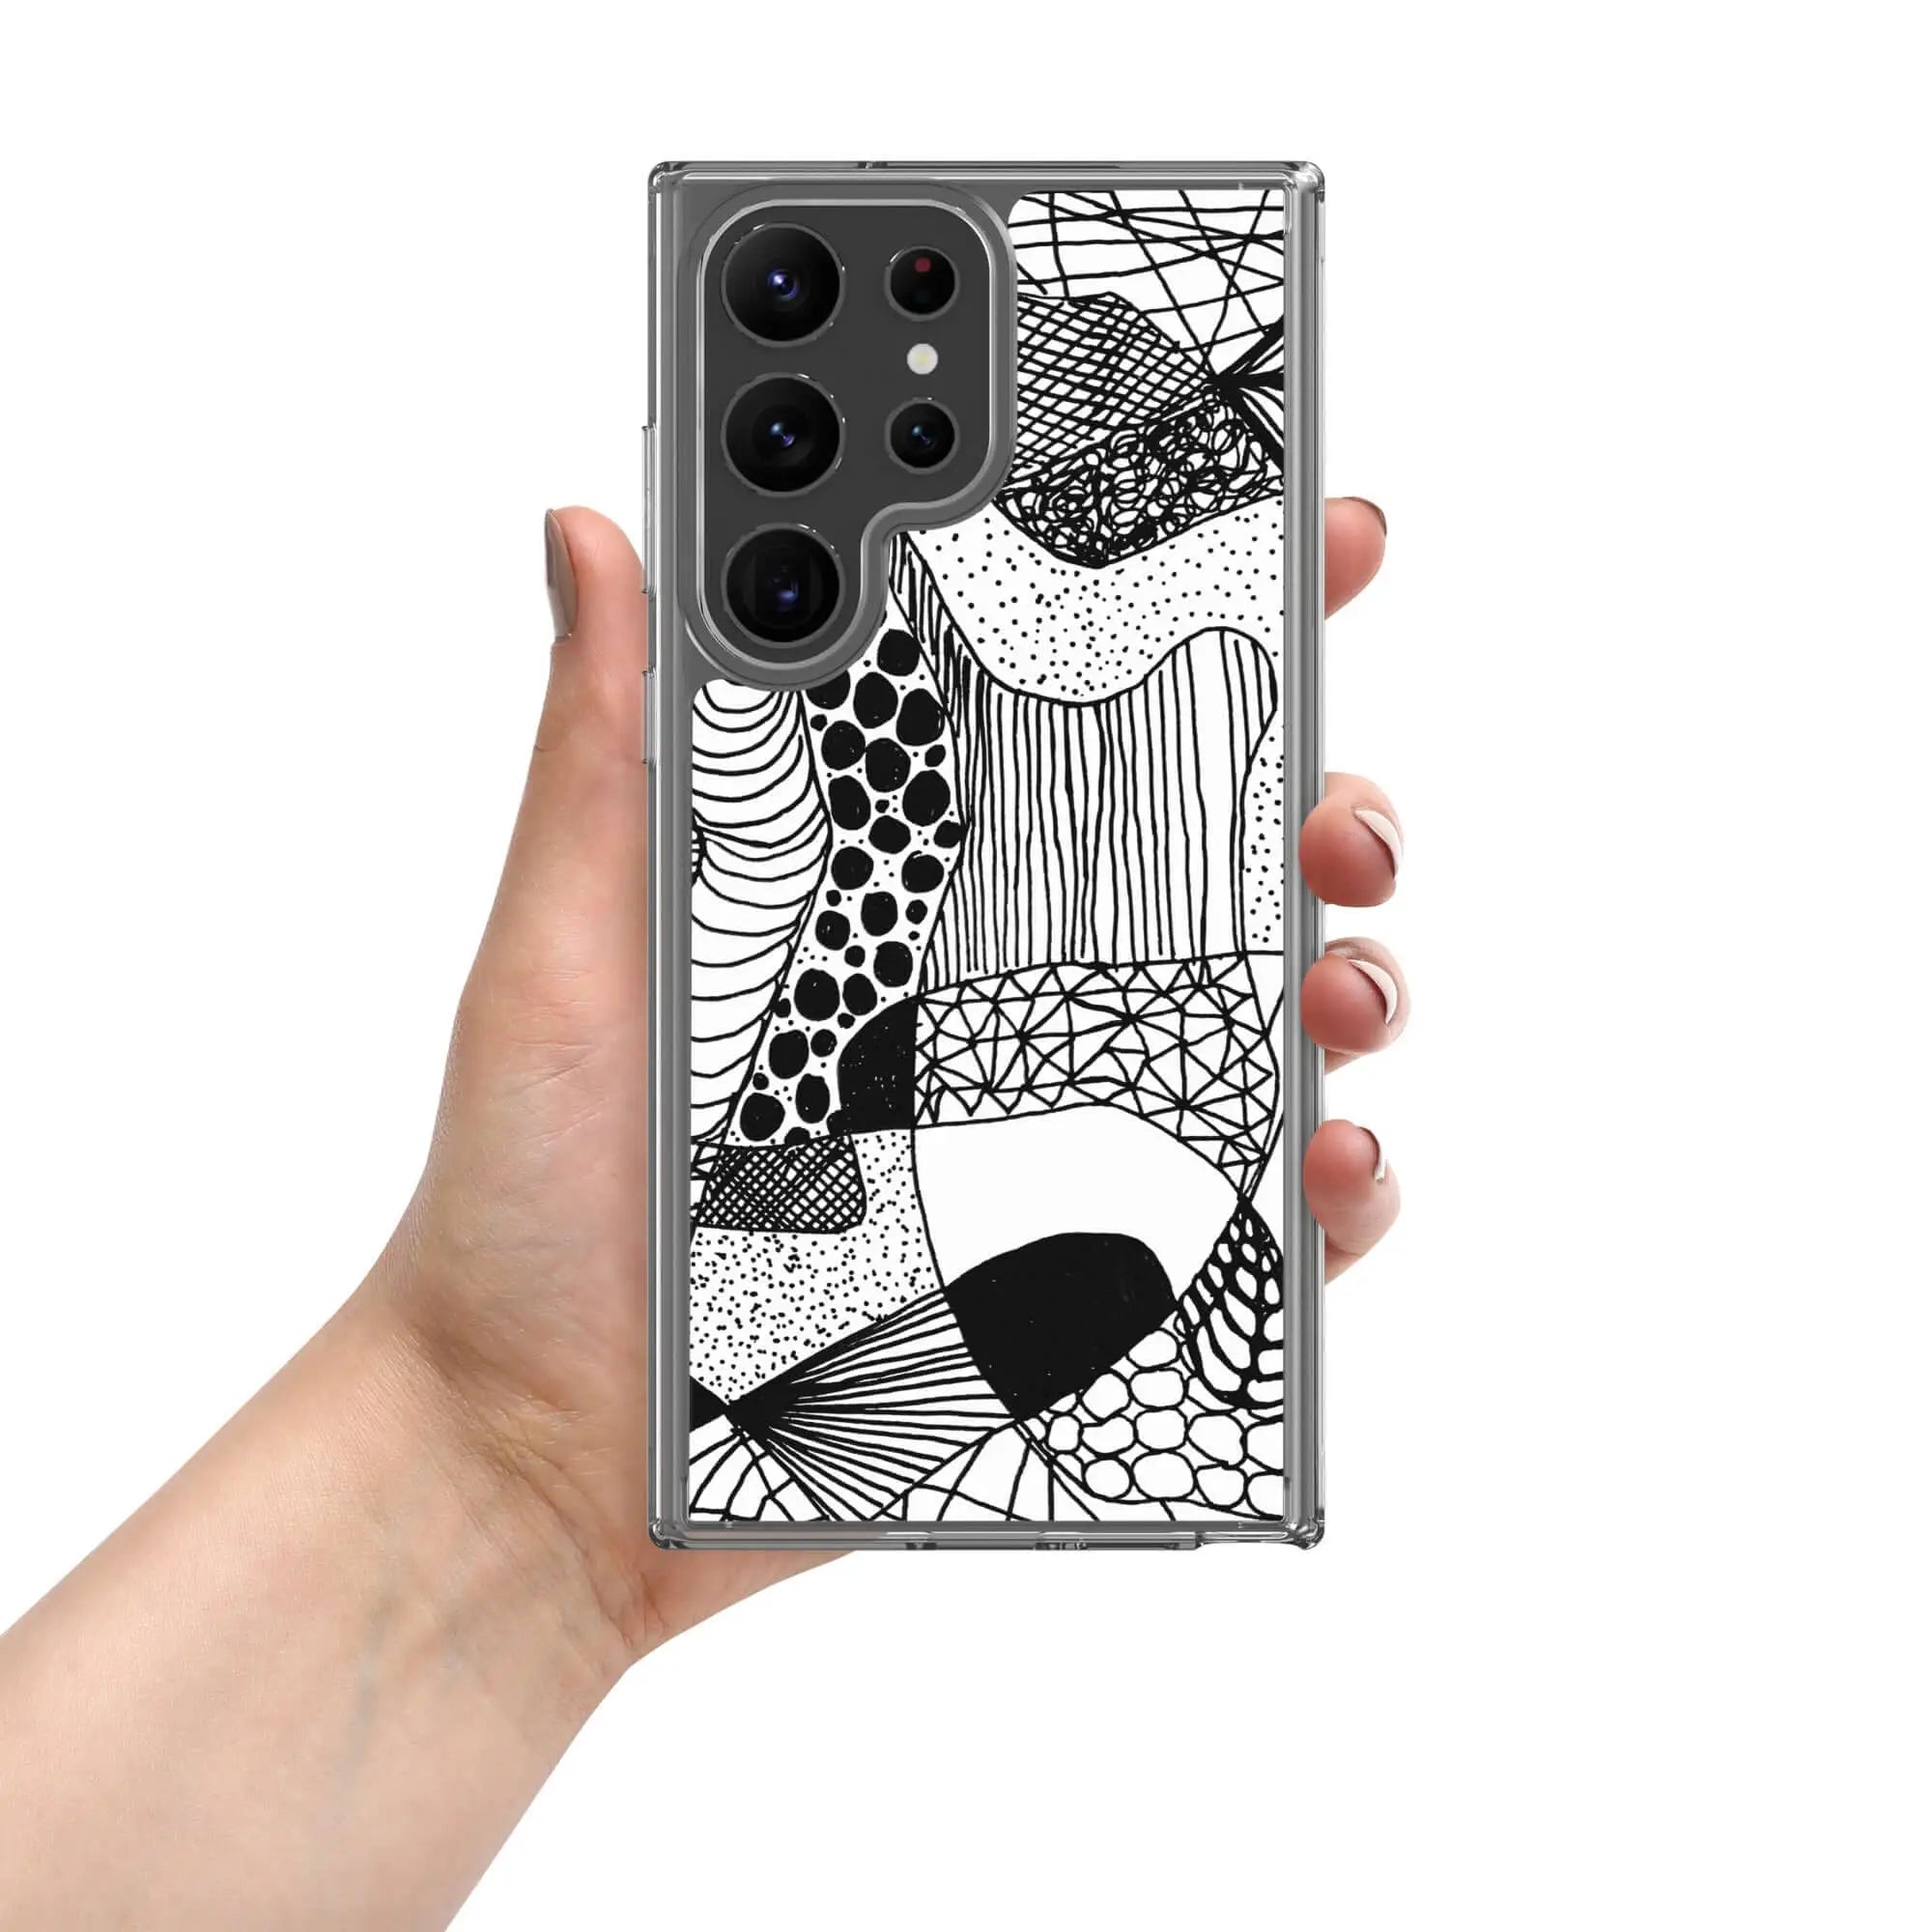 Samsung graphic abstract phone case